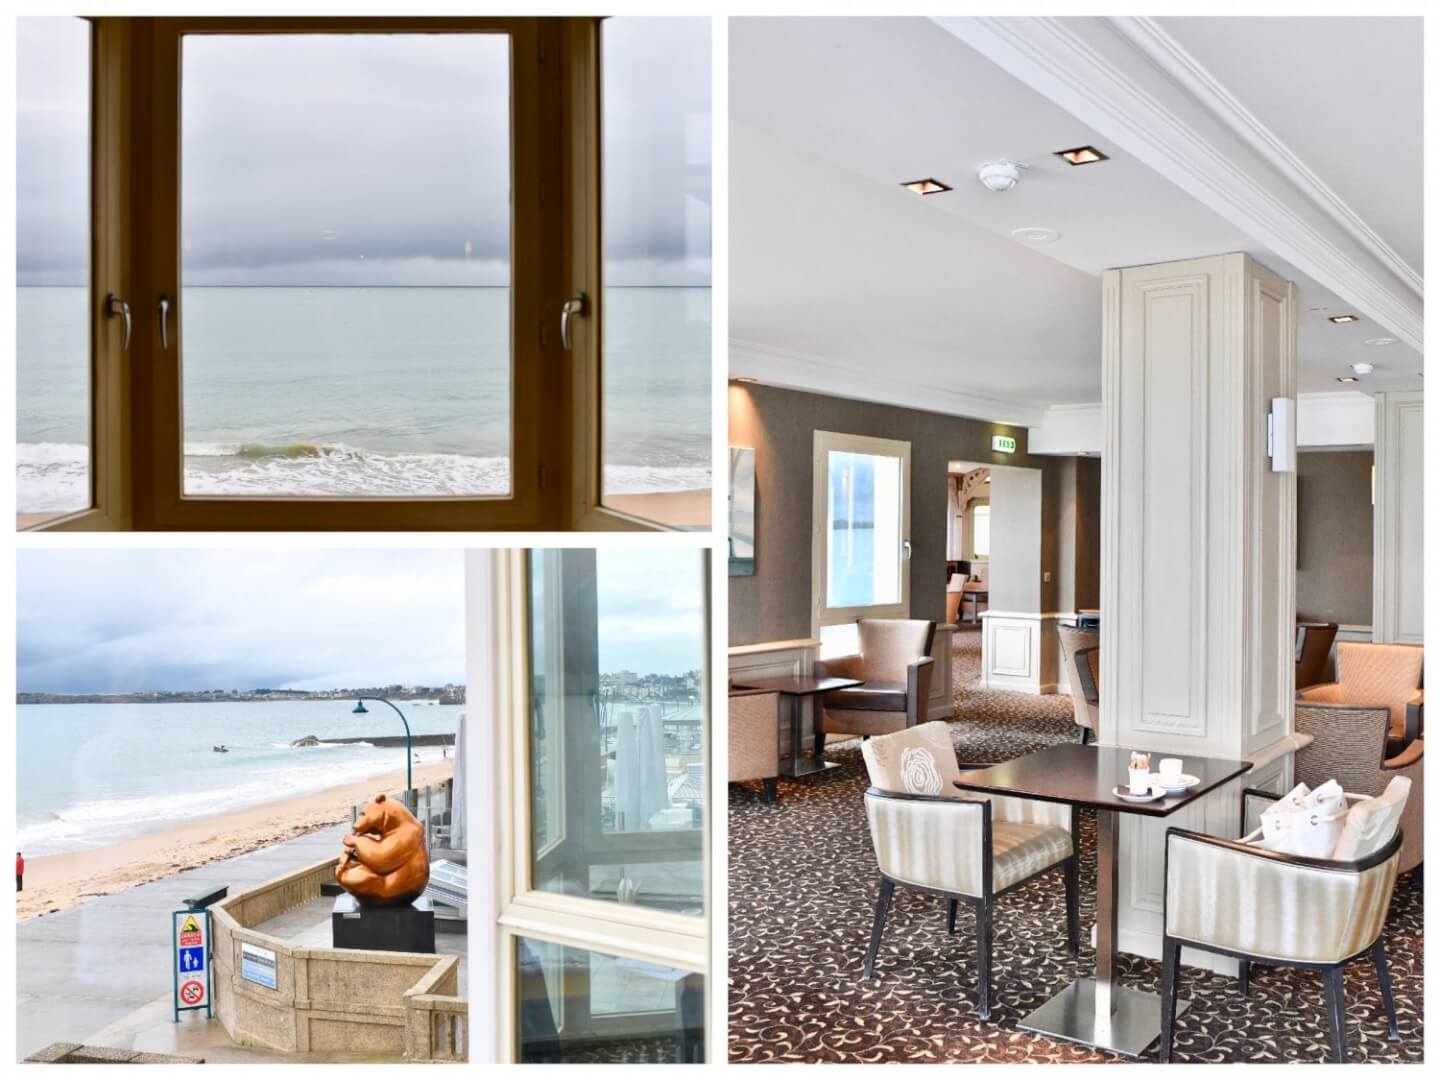 Thalasso Spa Escape with my Daughter - Le Grand Hotel des Thermes Saint-Malo